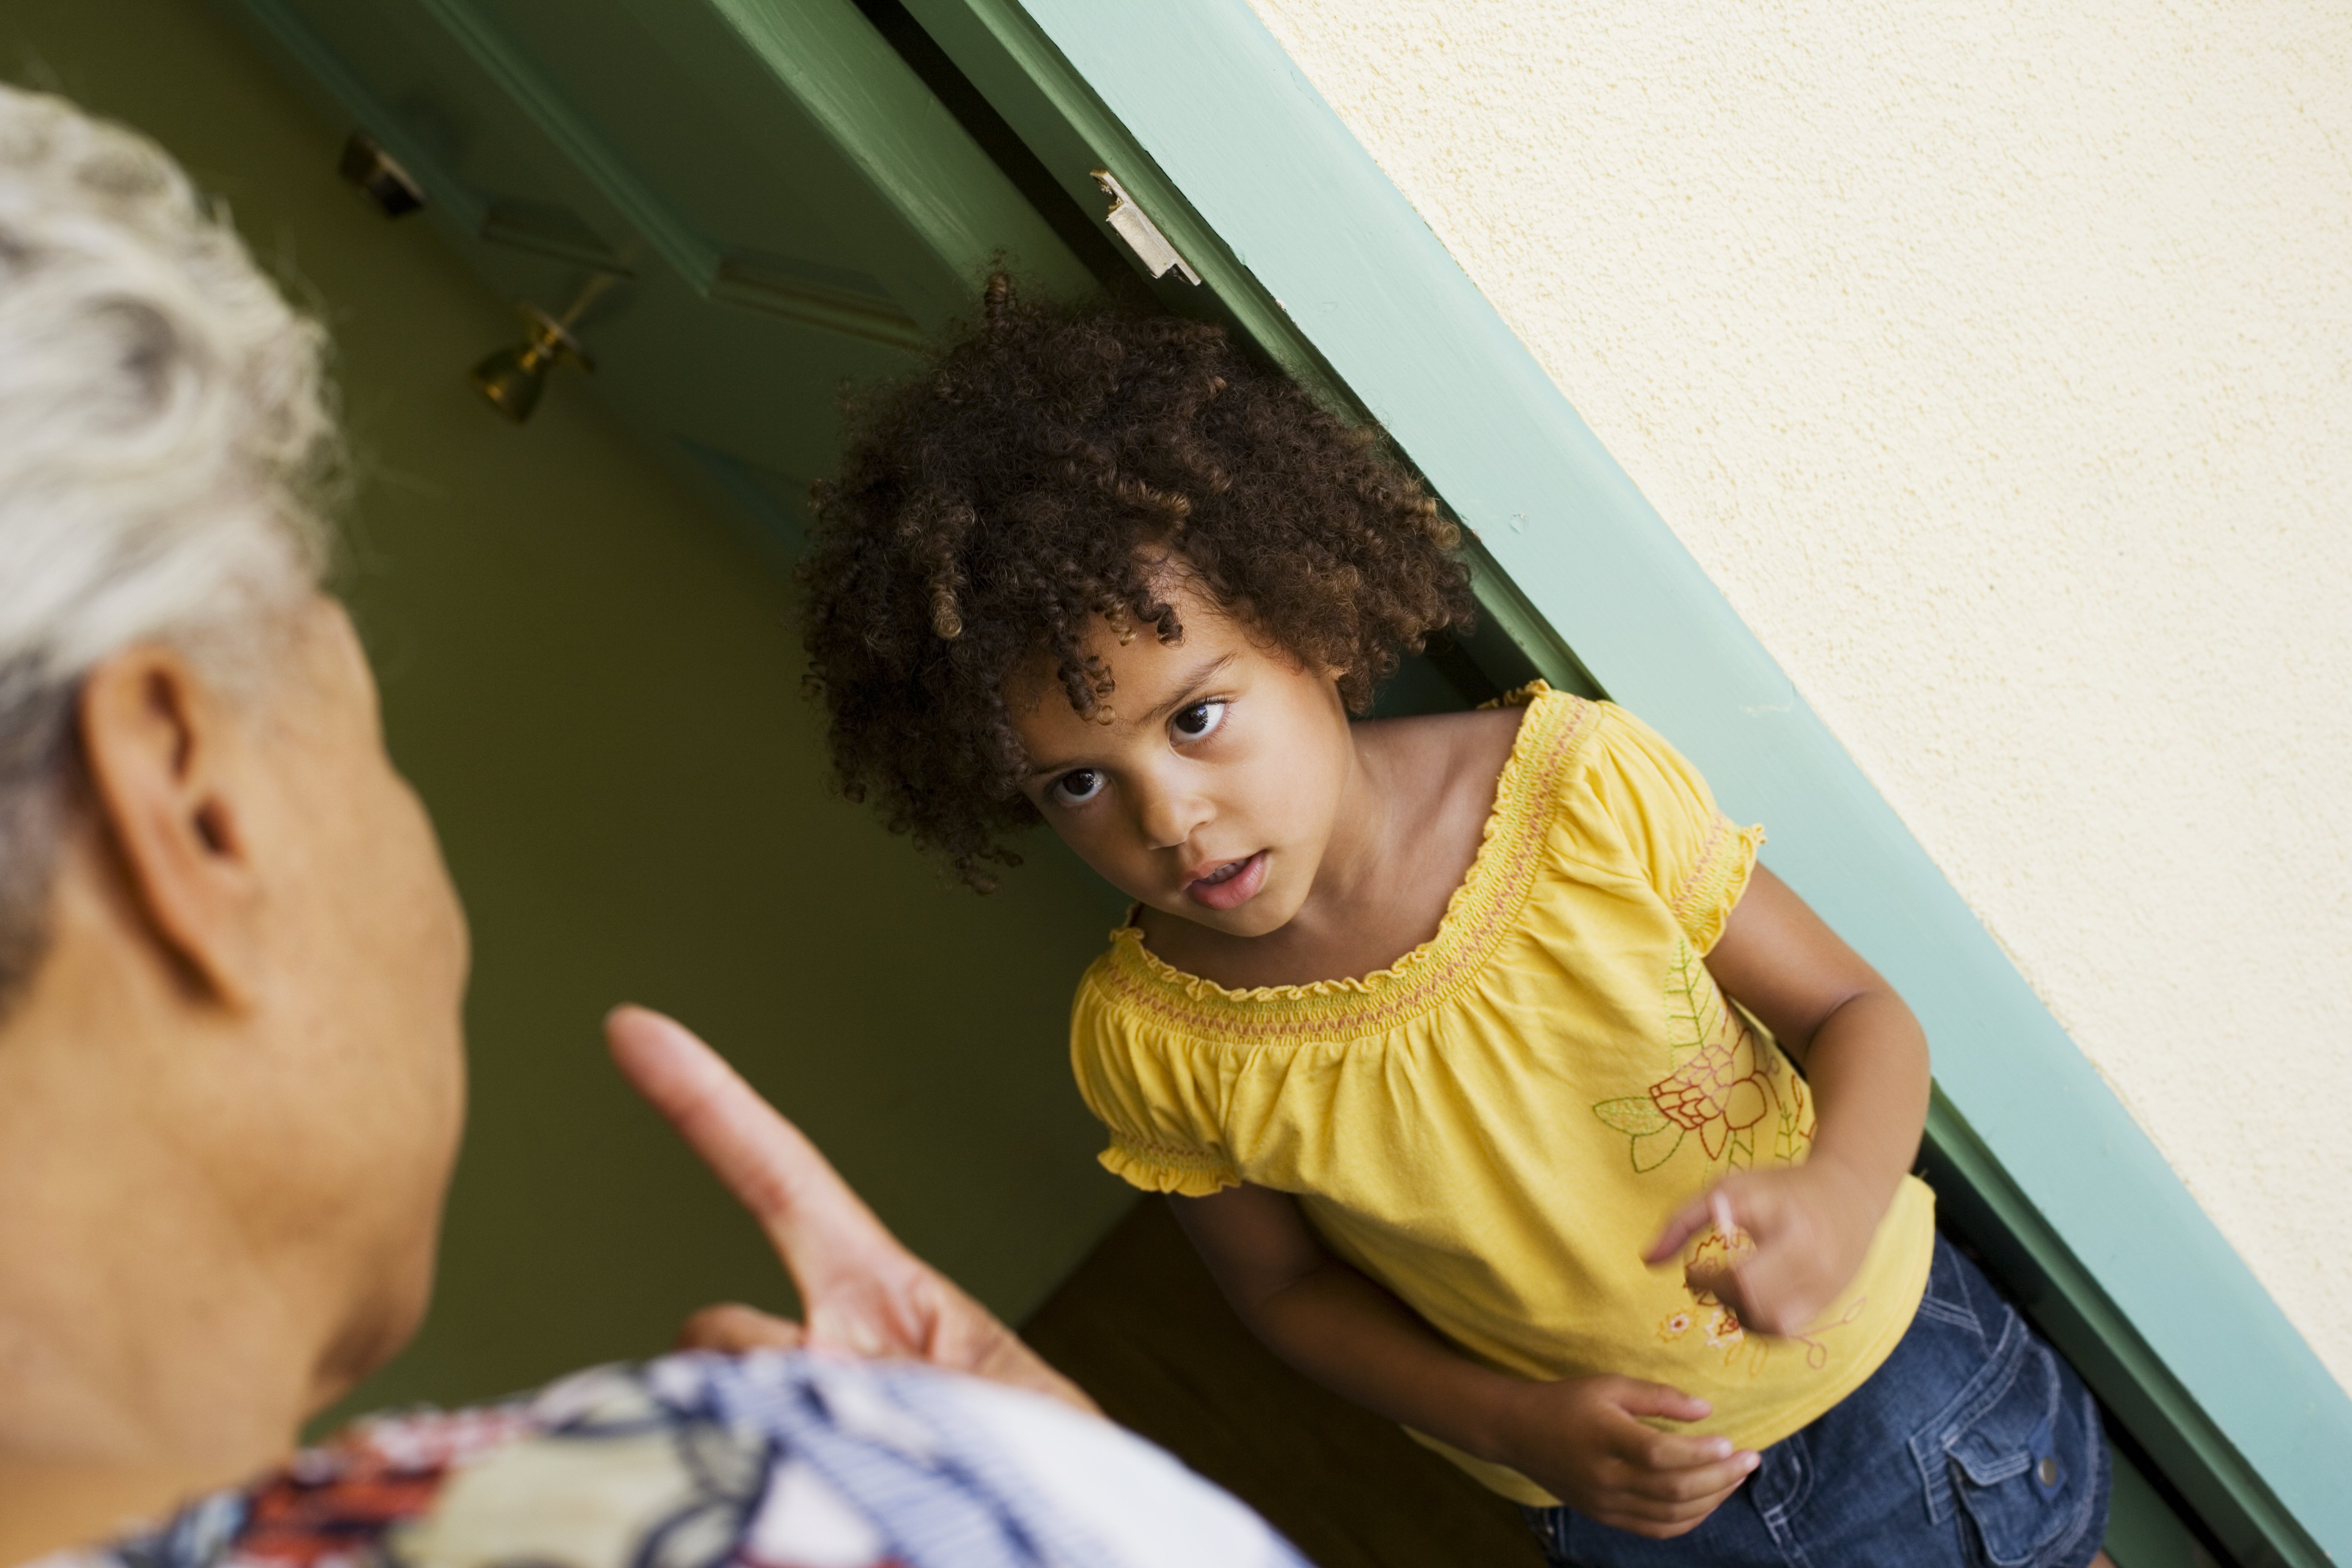 Woman scolding young girl in doorway | Photo: Getty Images